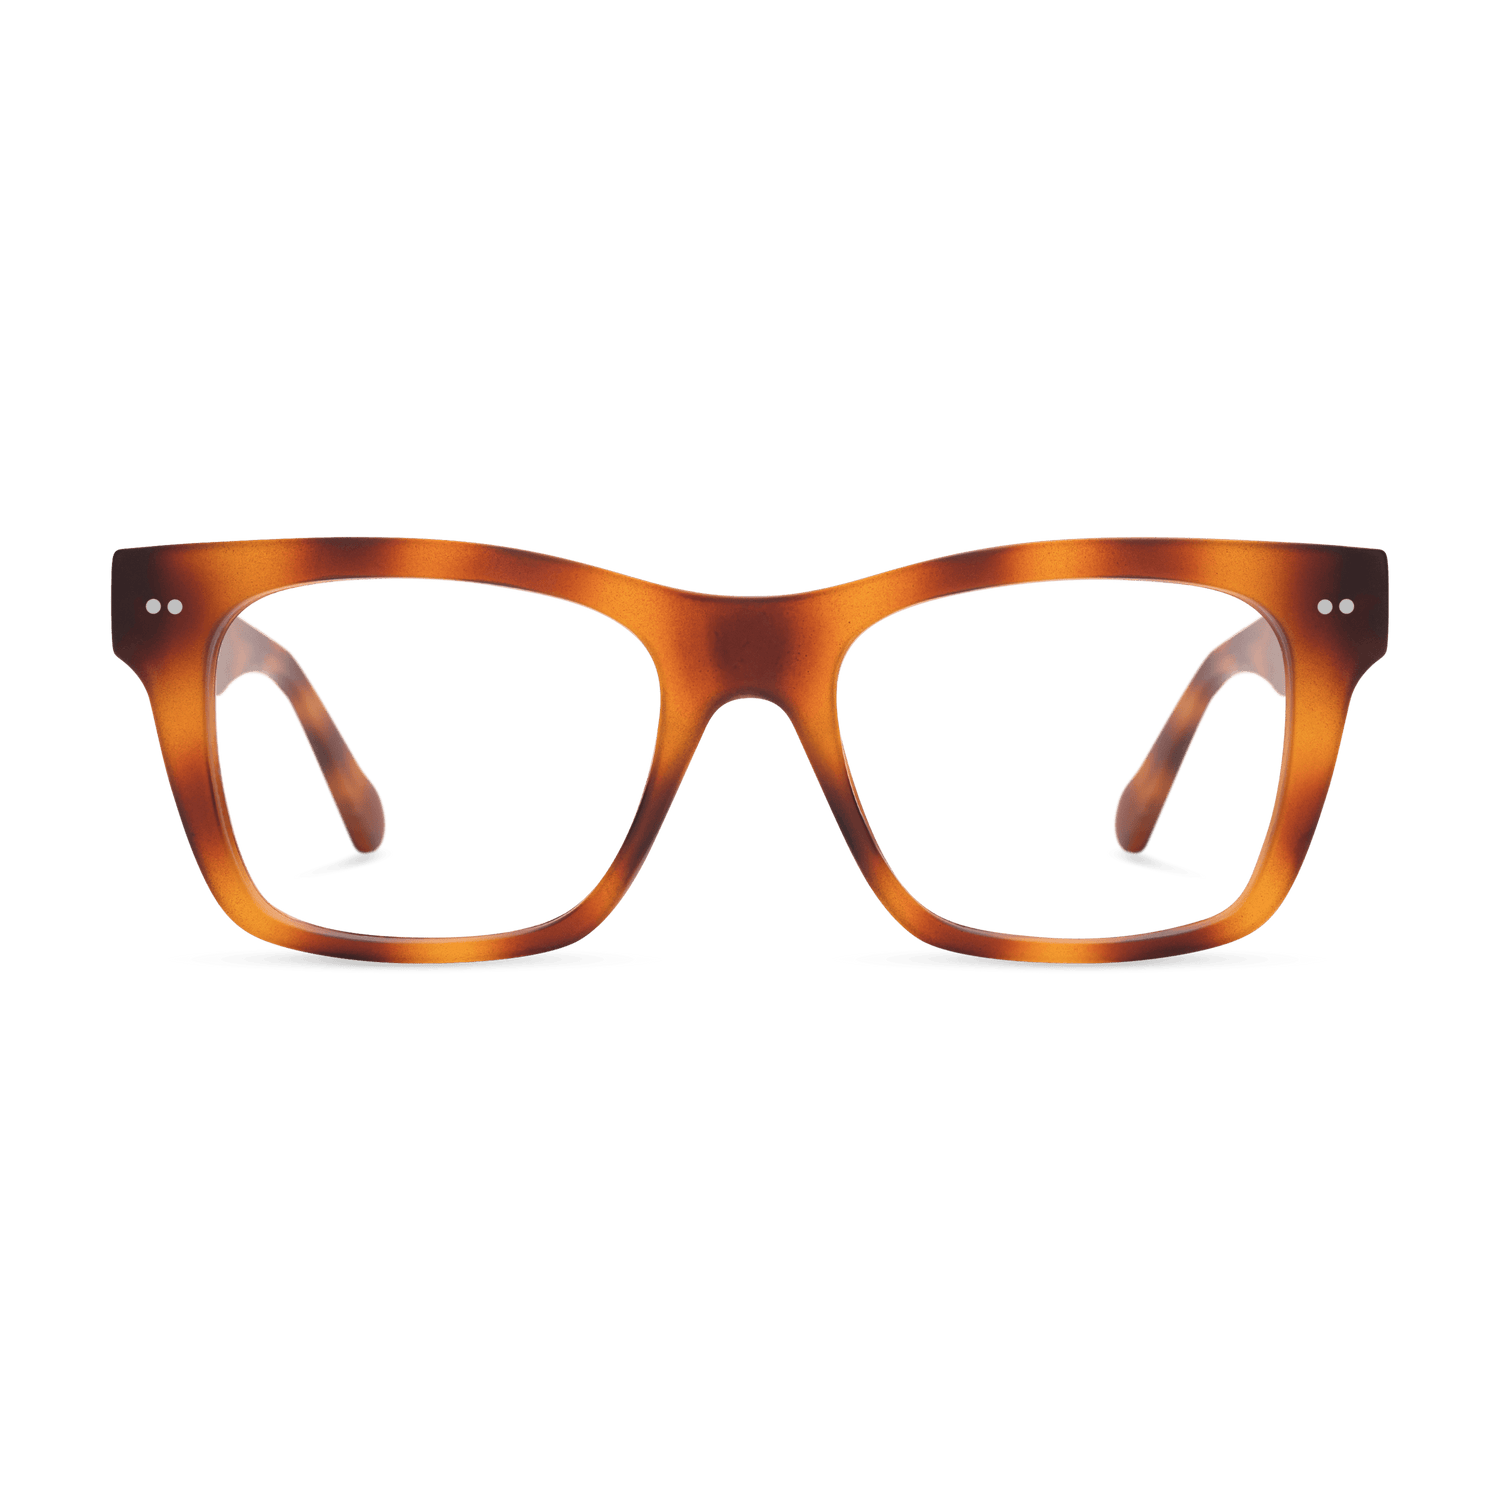 Cosmo Readers READING GLASSES LOOK OPTIC (Chestnut) +1.00 